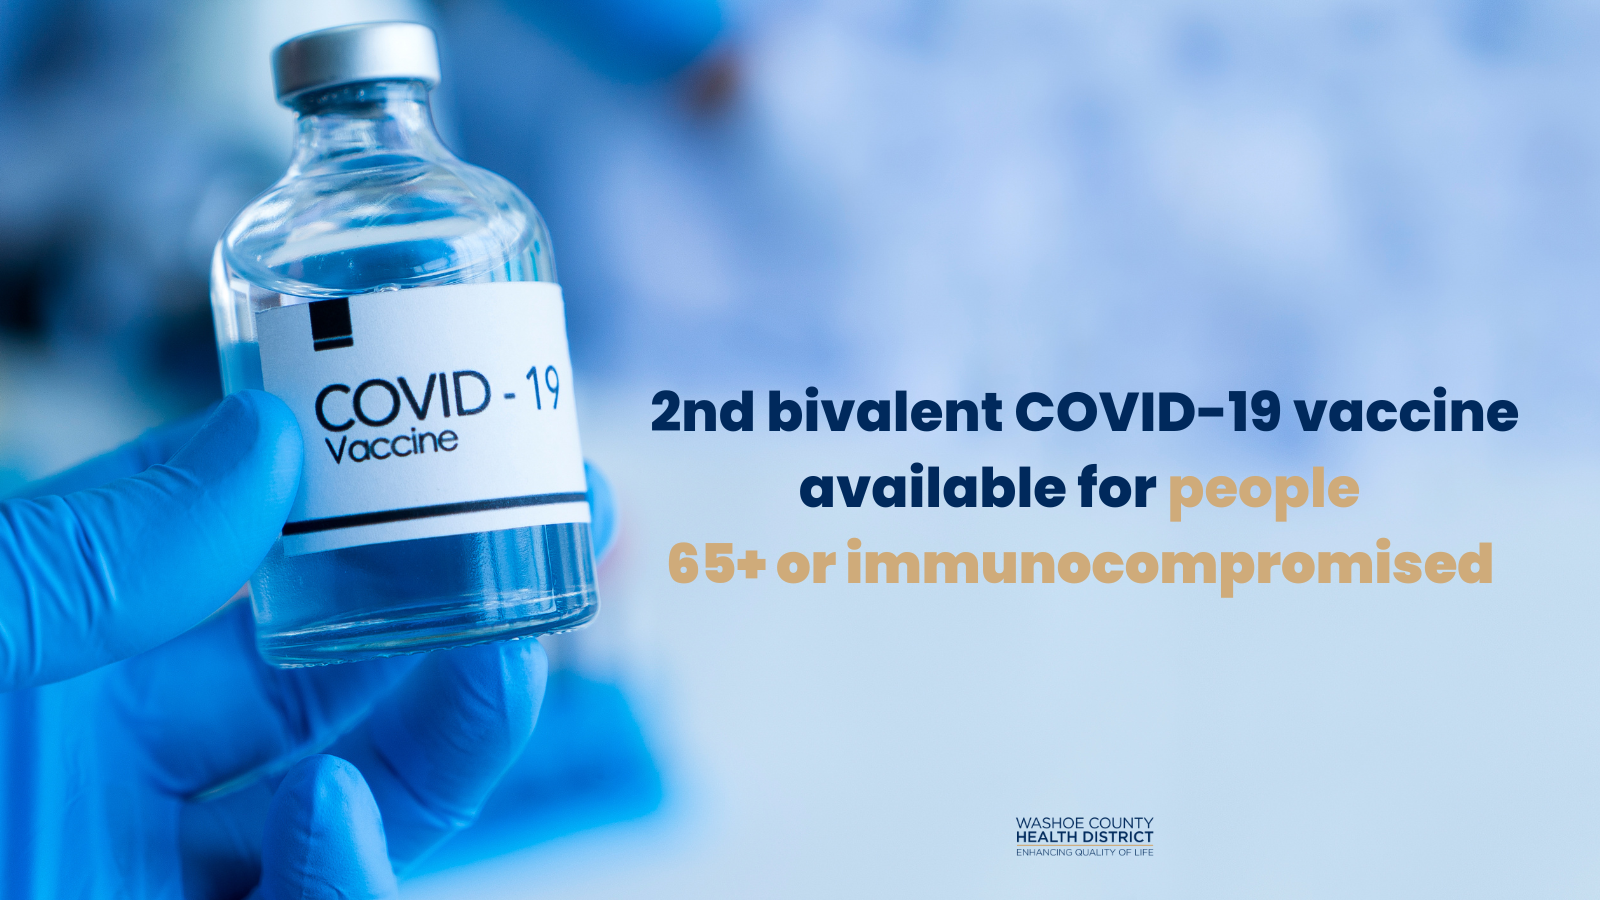 2nd bivalent COVID-19 vaccines are available for those 65+